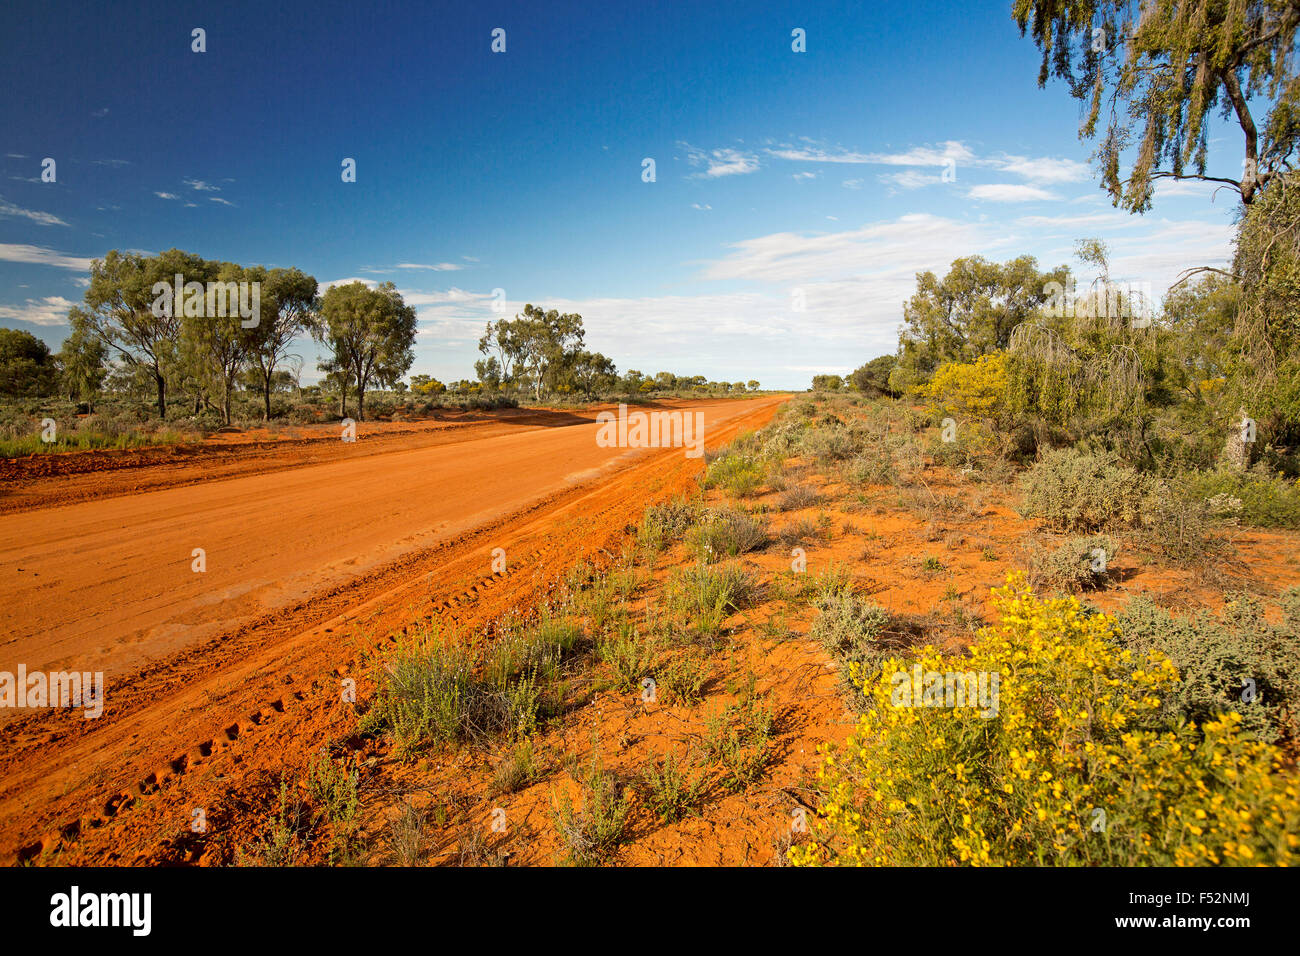 Long red sandy road slicing through Australian outback landscape with trees & golden wildflowers to distance horizon under blue sky Stock Photo